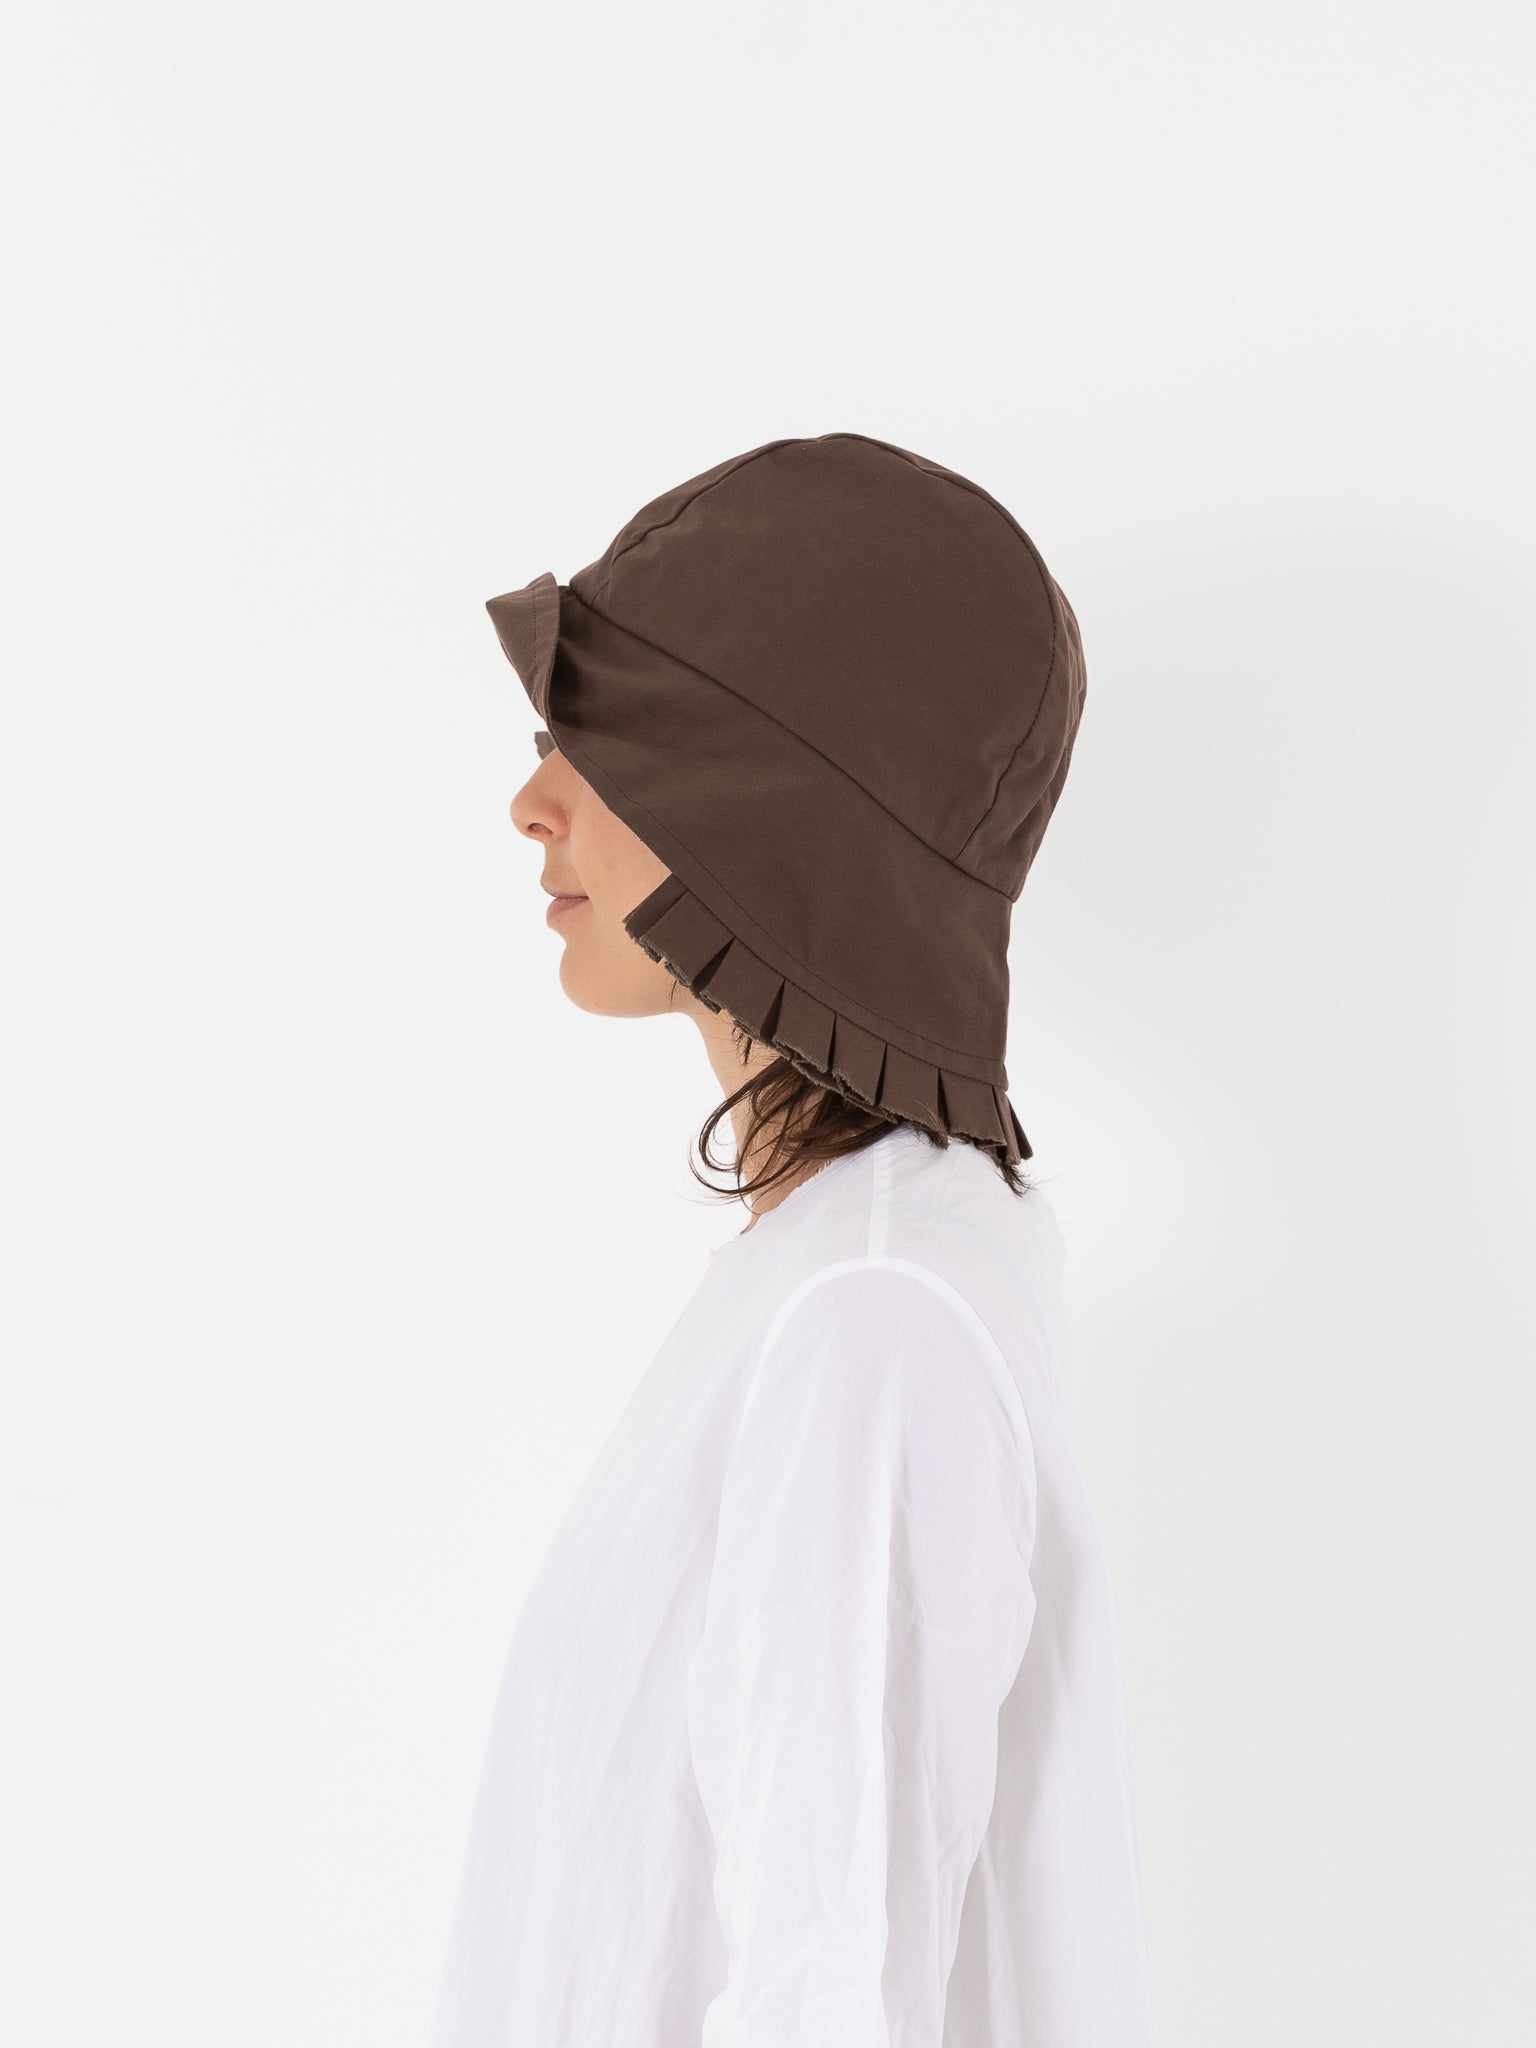 Studio Kettle Fisherman Hat with Frill, Cocoa - Worthwhile, Inc.